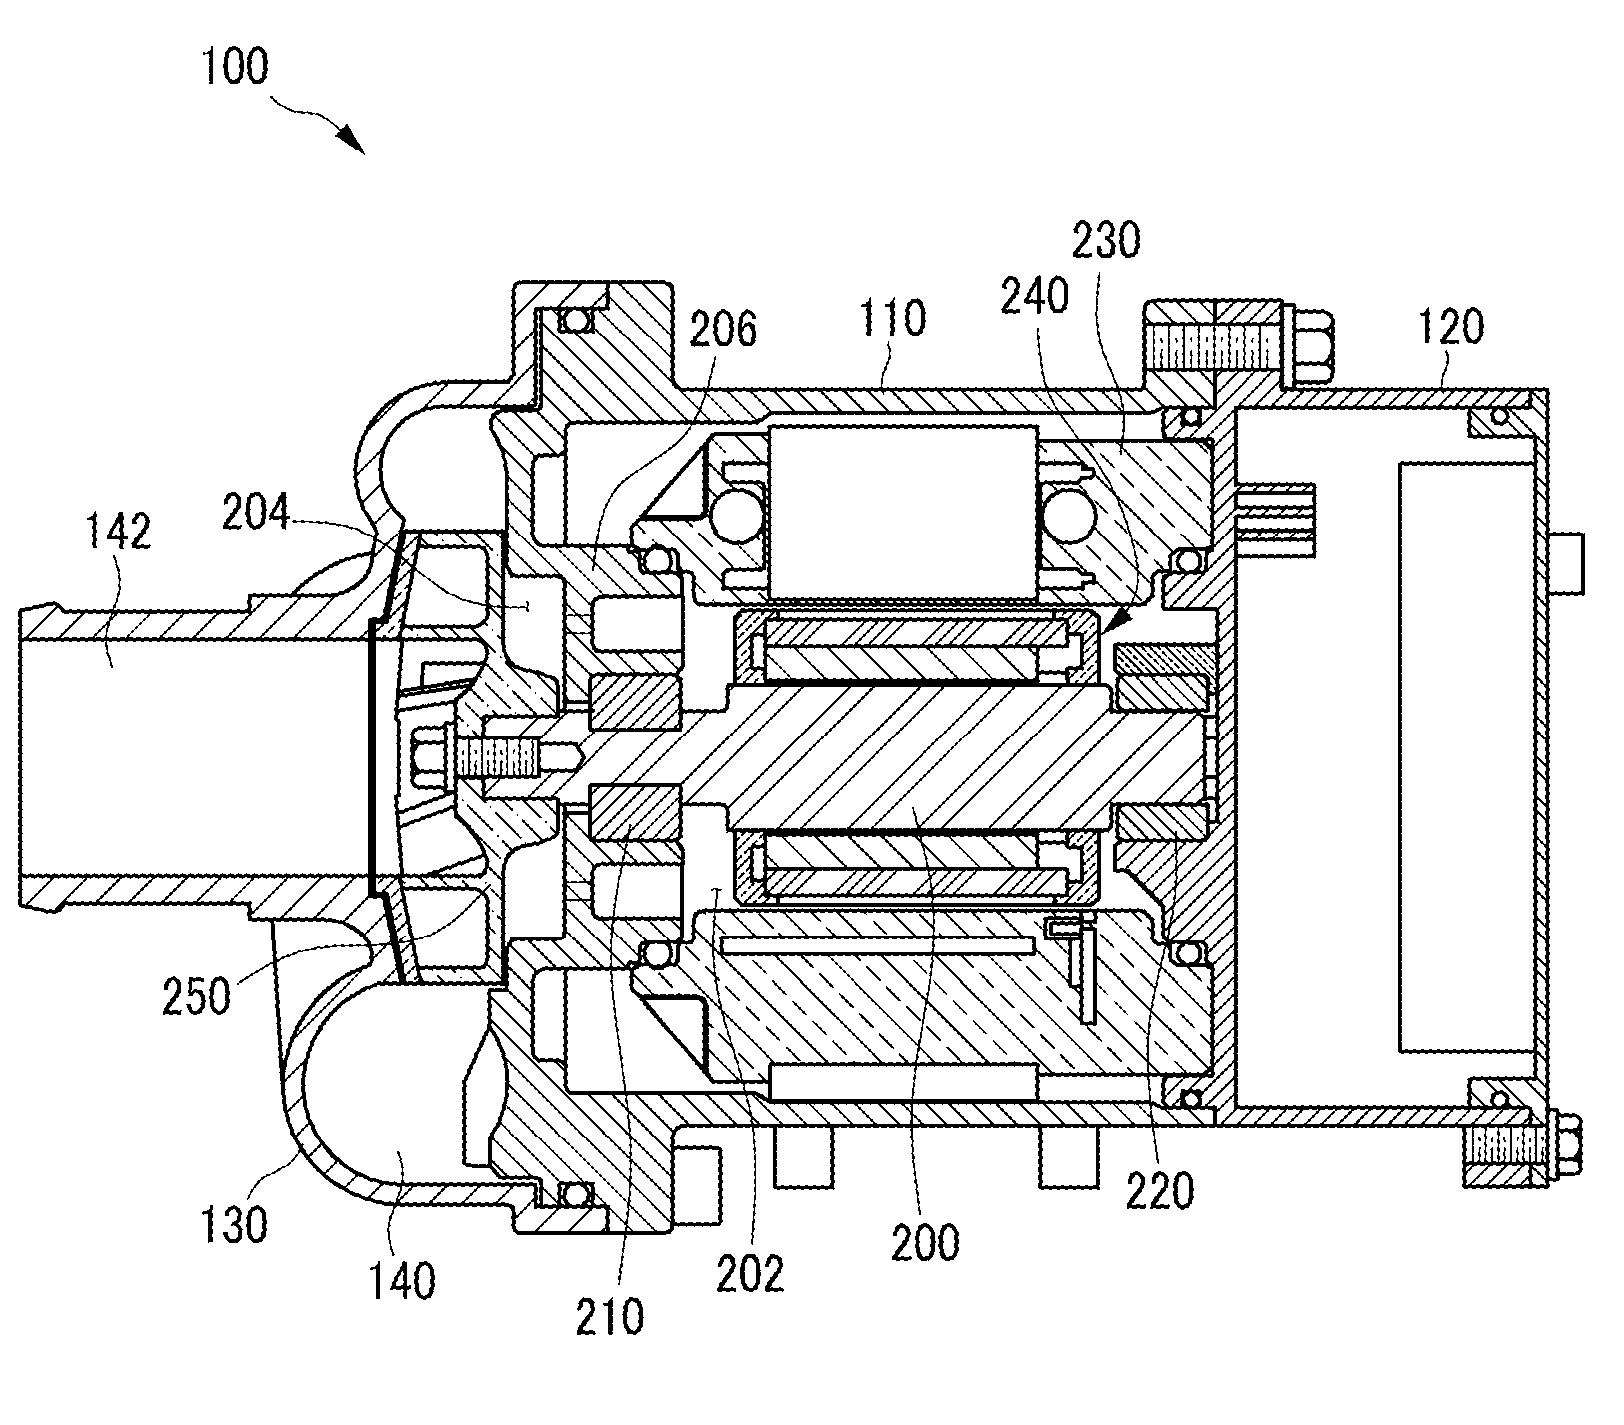 Water pump provided with a bearing